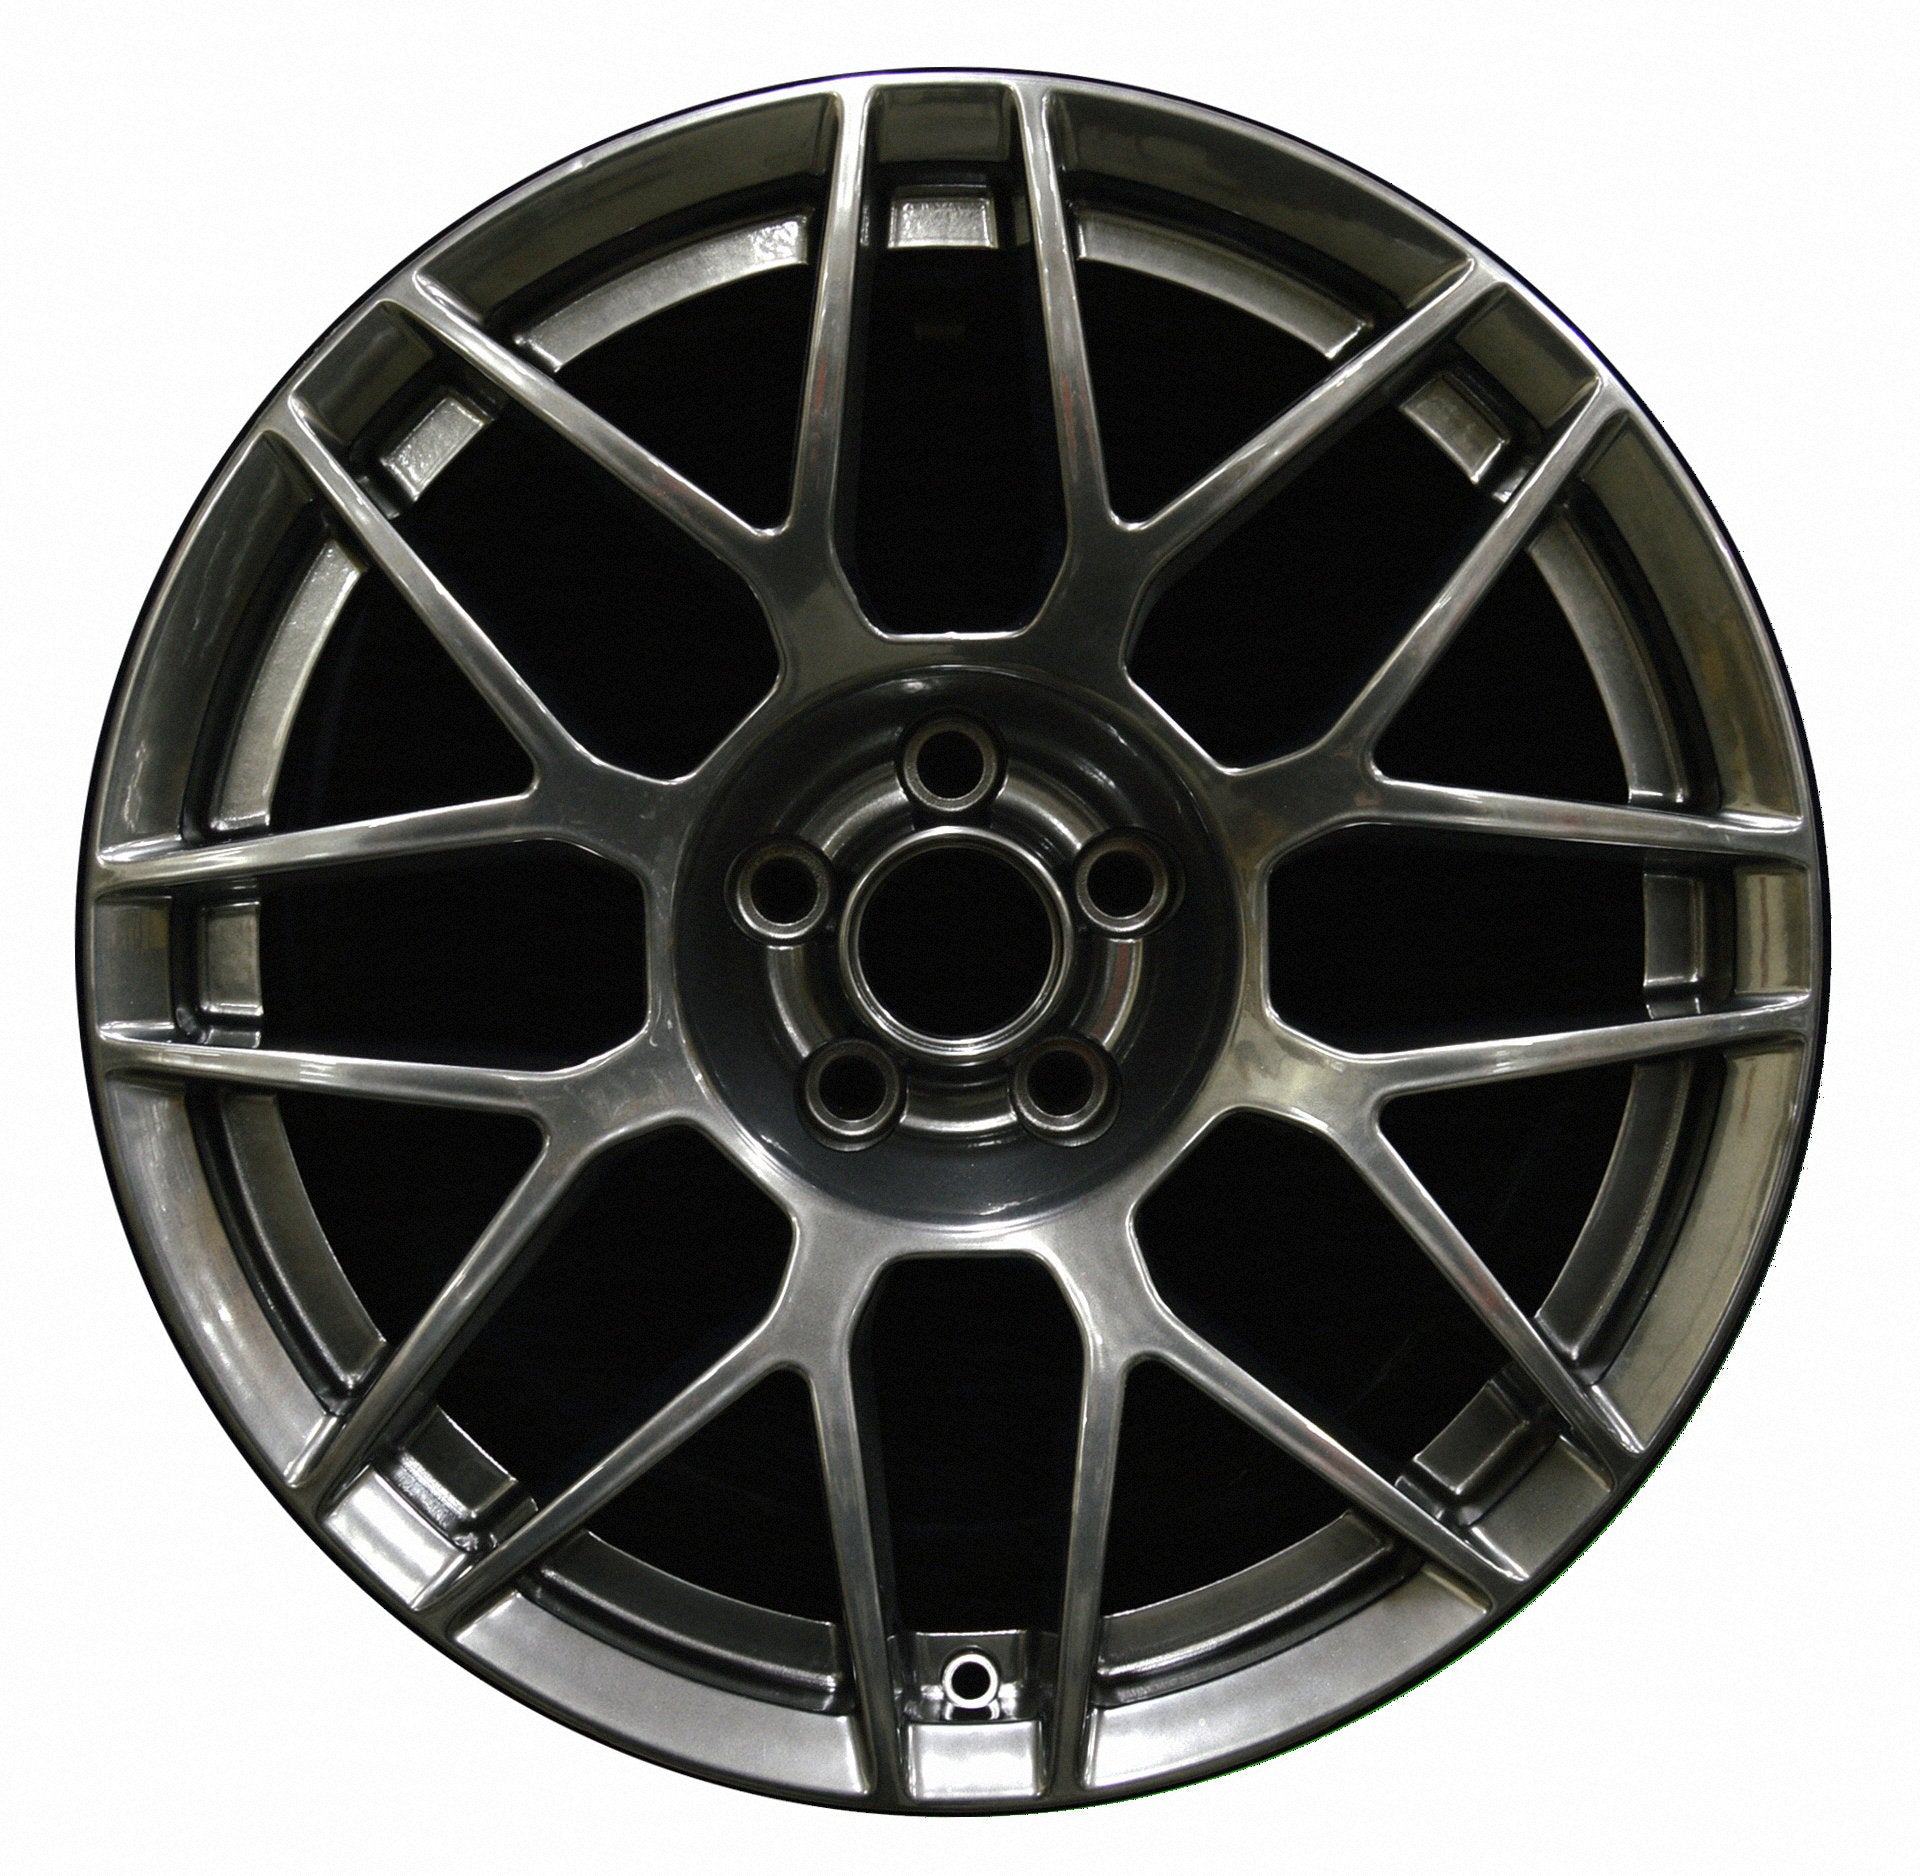 Ford Mustang  2011, 2012 Factory OEM Car Wheel Size 19x9.5 Alloy WAO.3865FT.HYPV3.FF